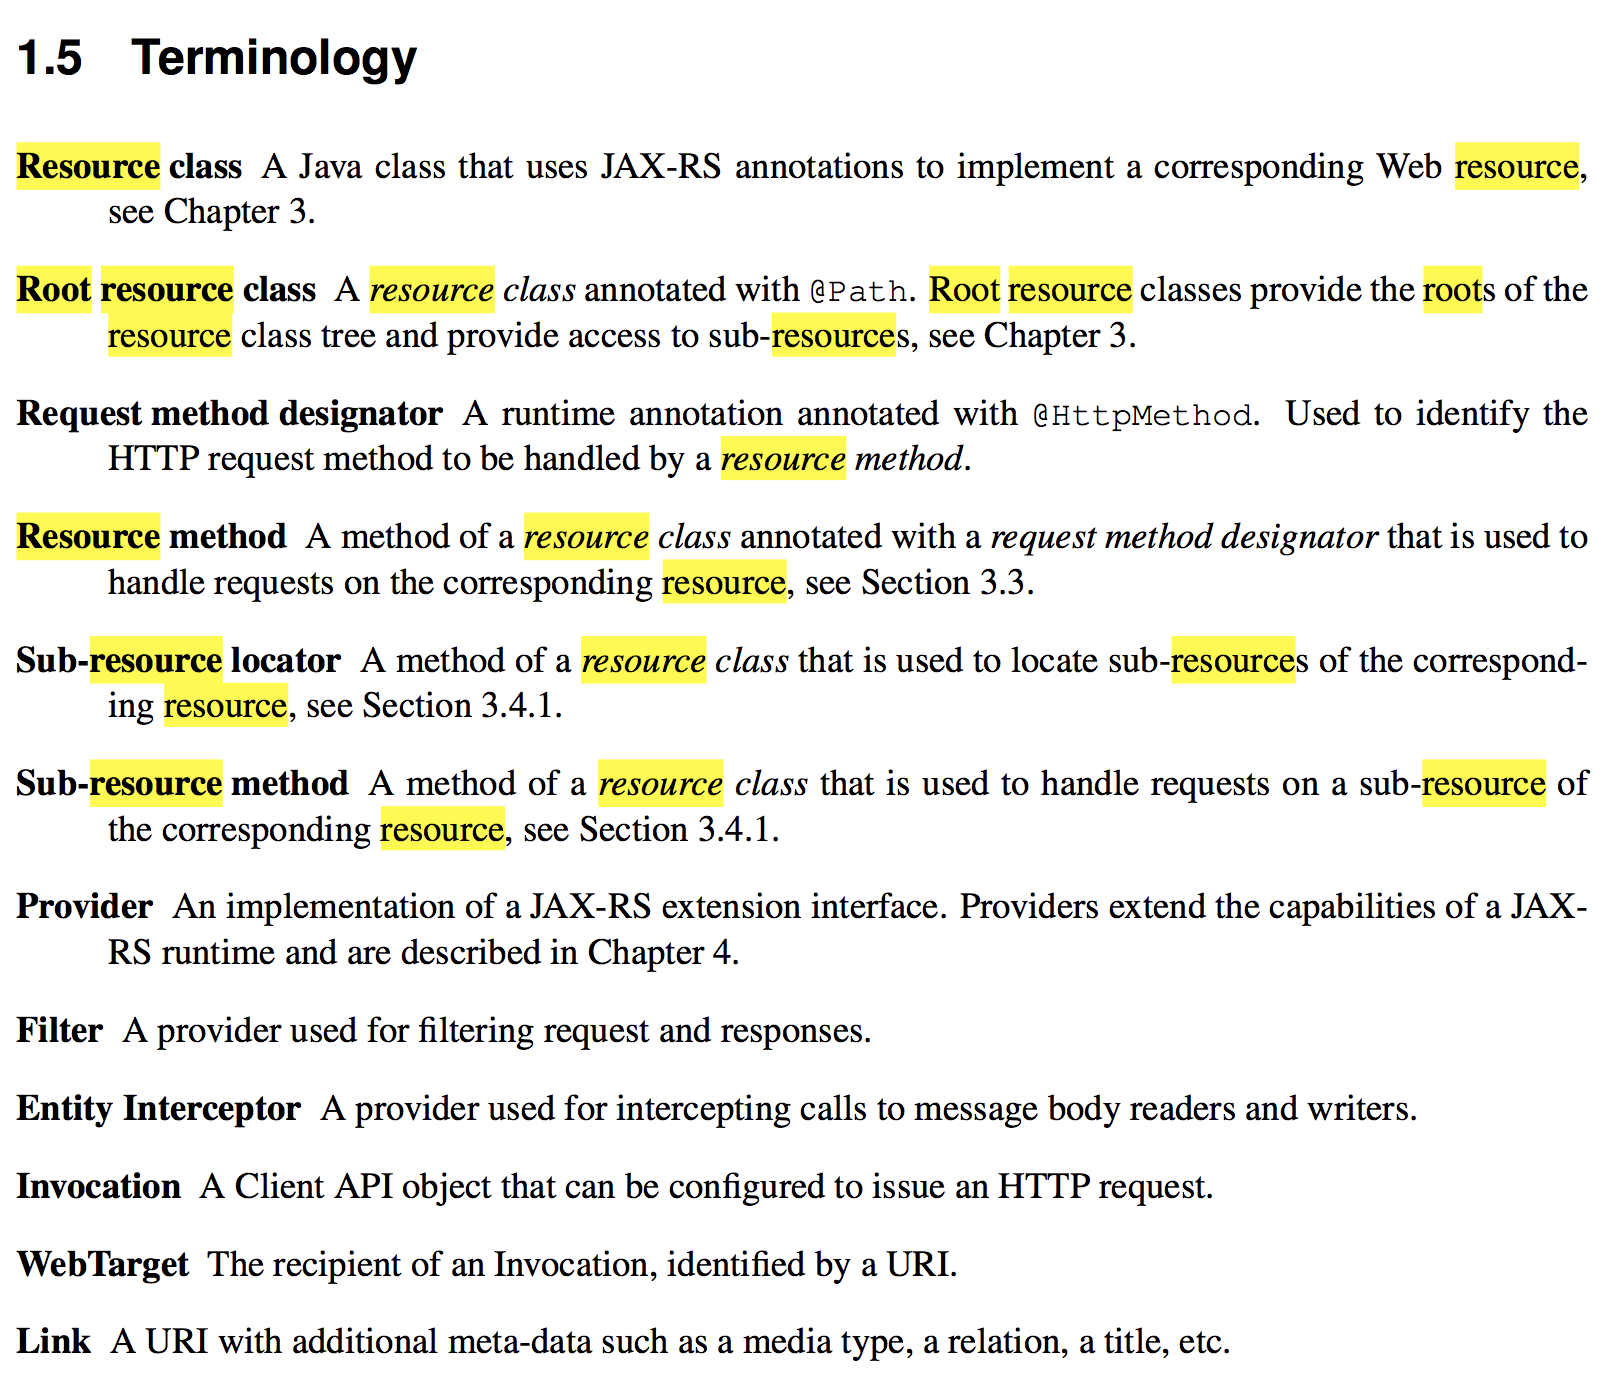 2017-03-10-terminology.png